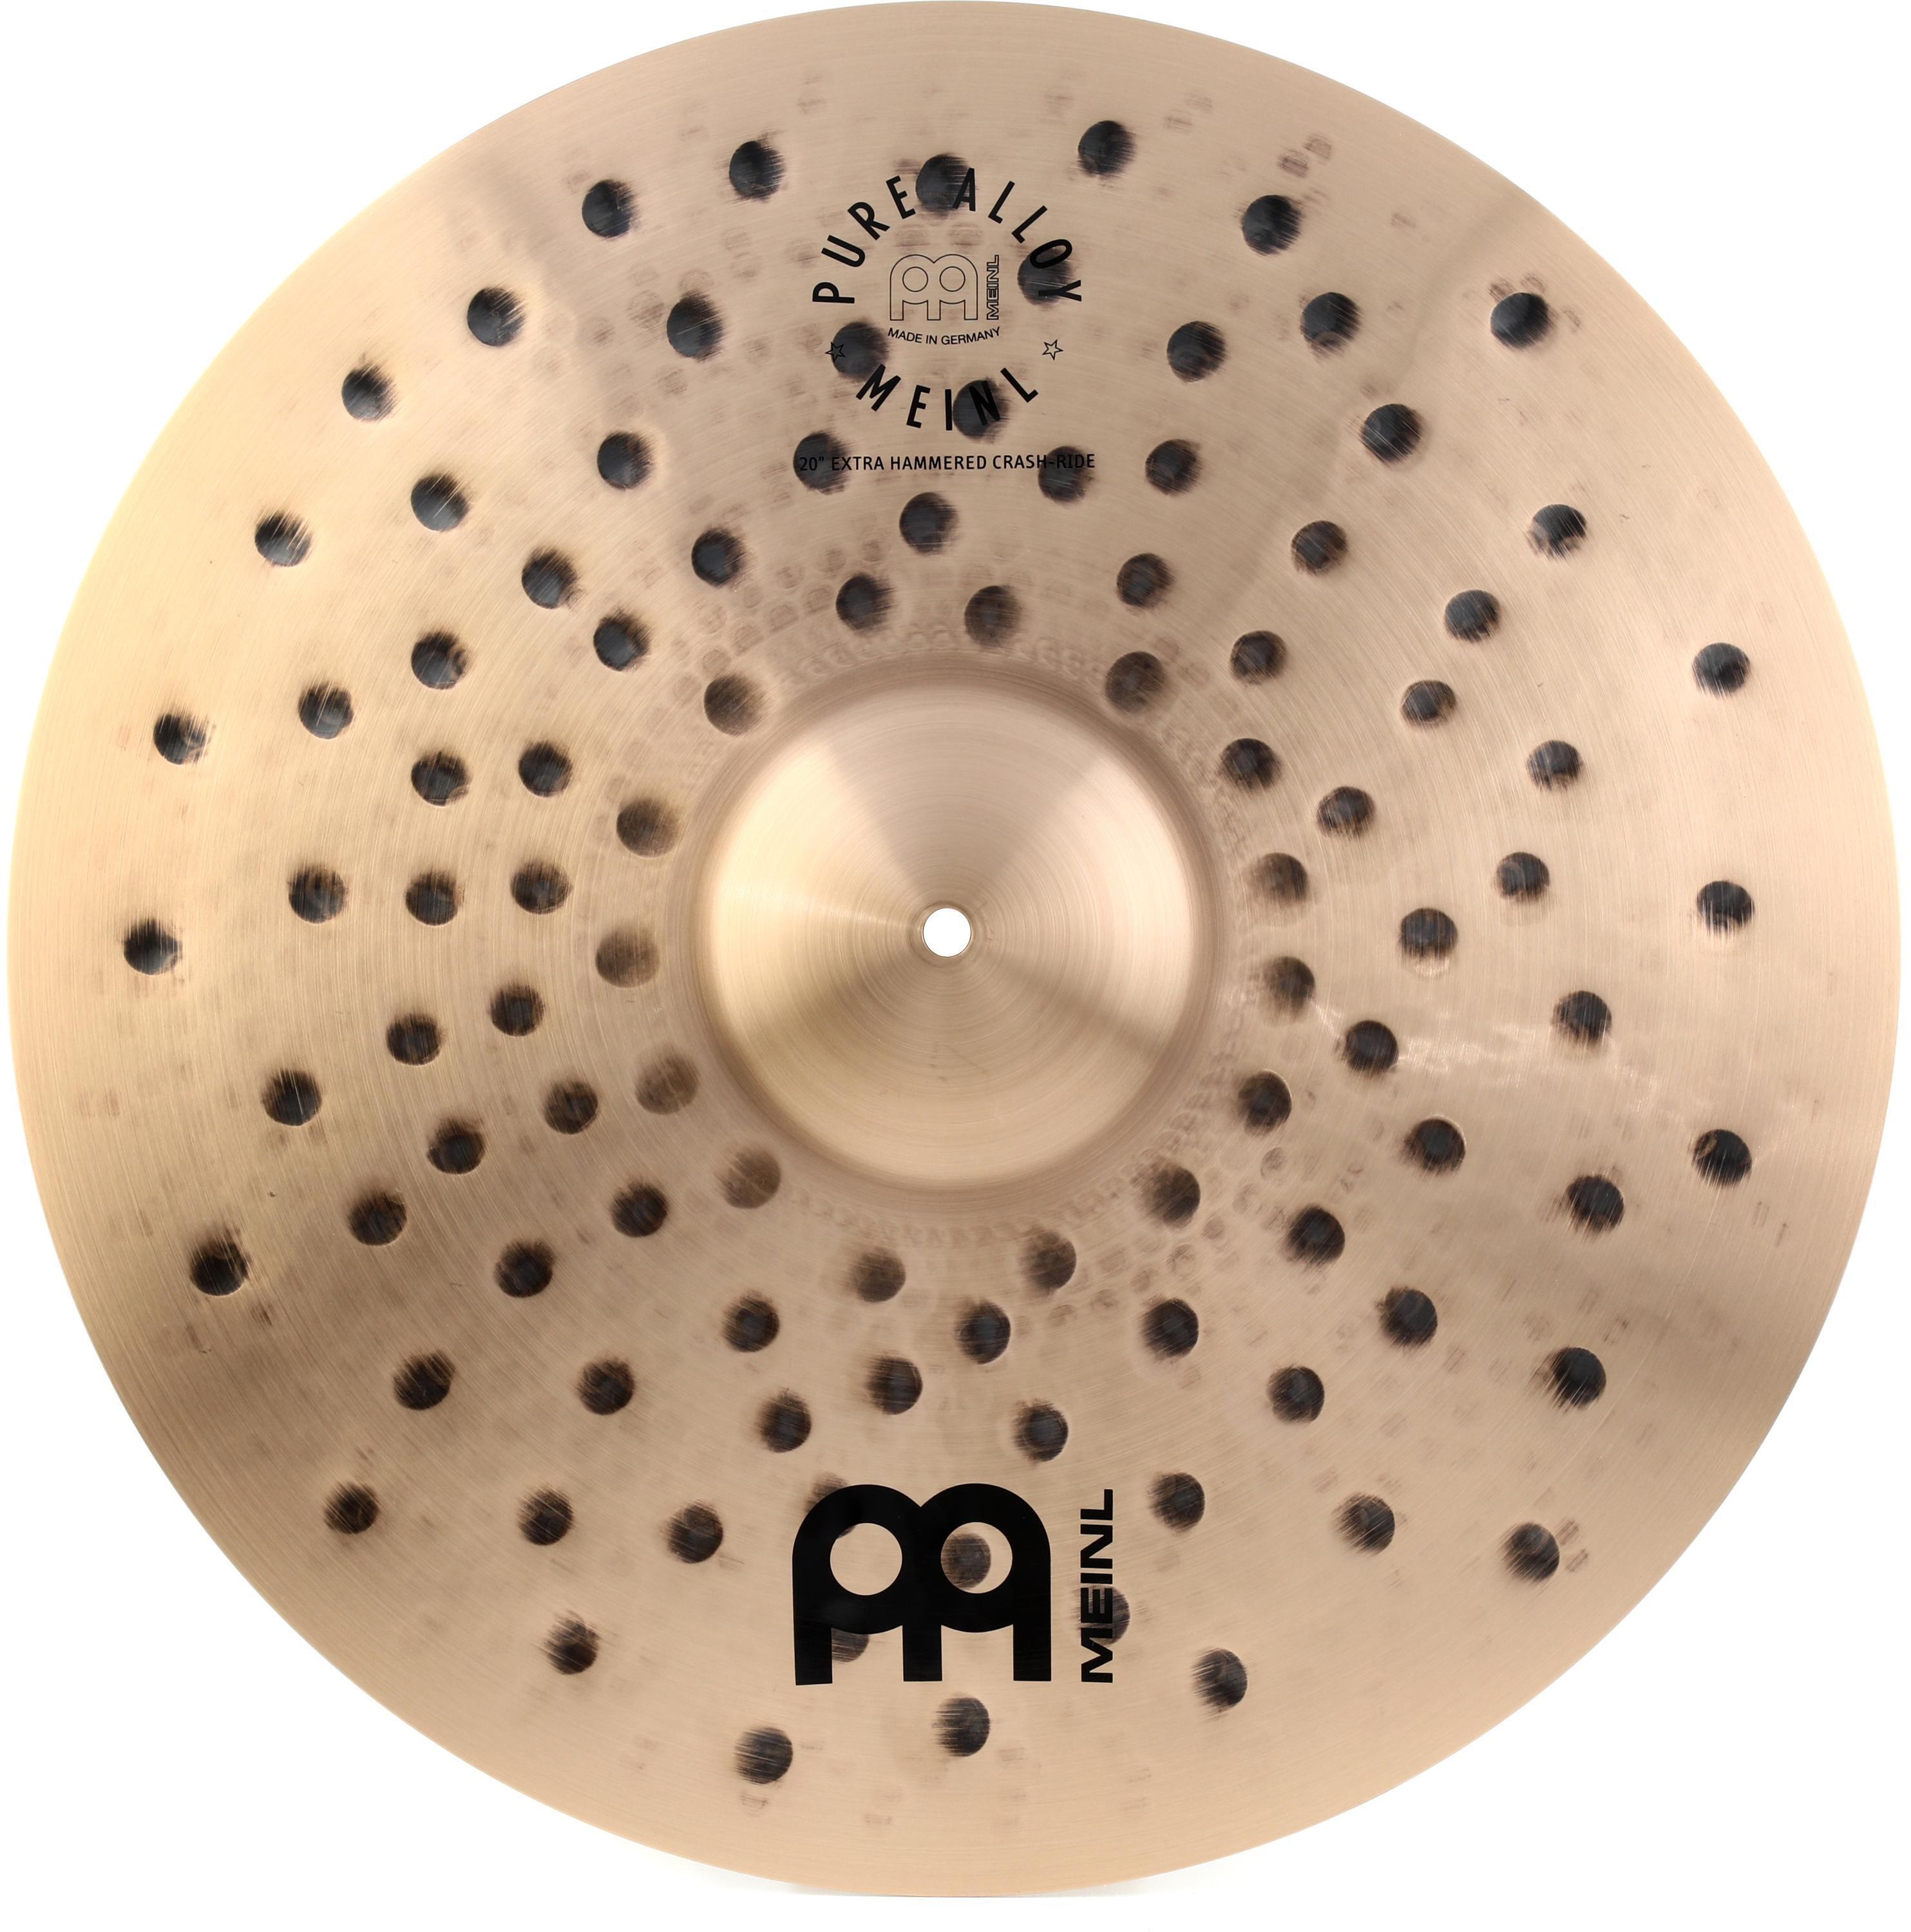 Meinl Cymbals Pure Alloy Crash/Ride Cymbal - 20 inch, Extra Hammered